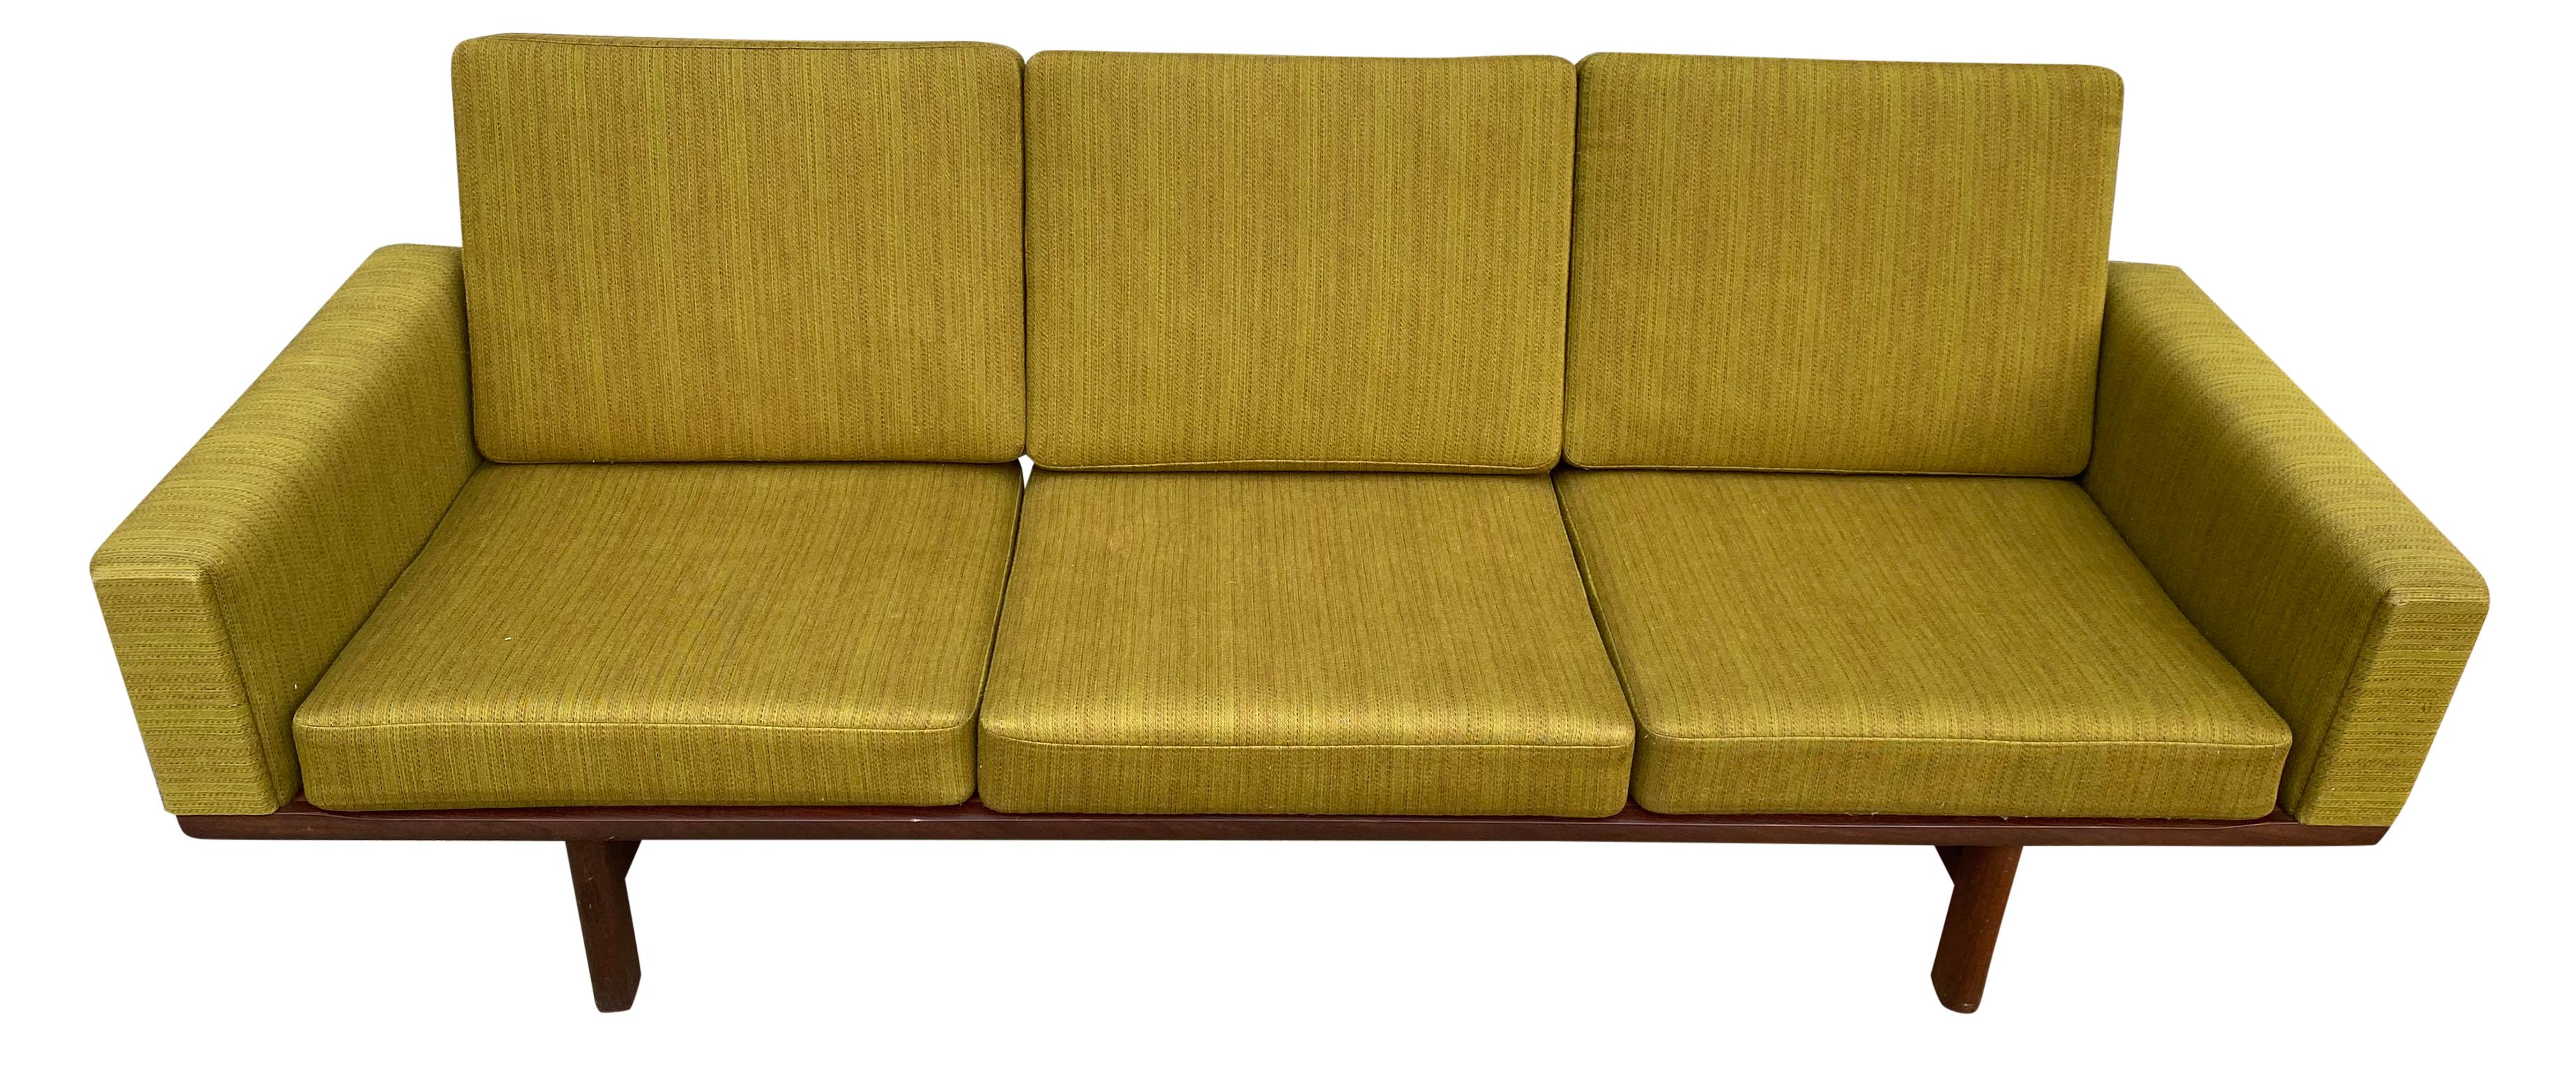 Vintage 1960s Danish three-seat sofa rare model GE-236/3 designed by Hans Wegner for GETAMA Manufacturer solid Teak frame and legs with original patina has original spring loaded cushions with original medium Green woven wool upholstery in vintage